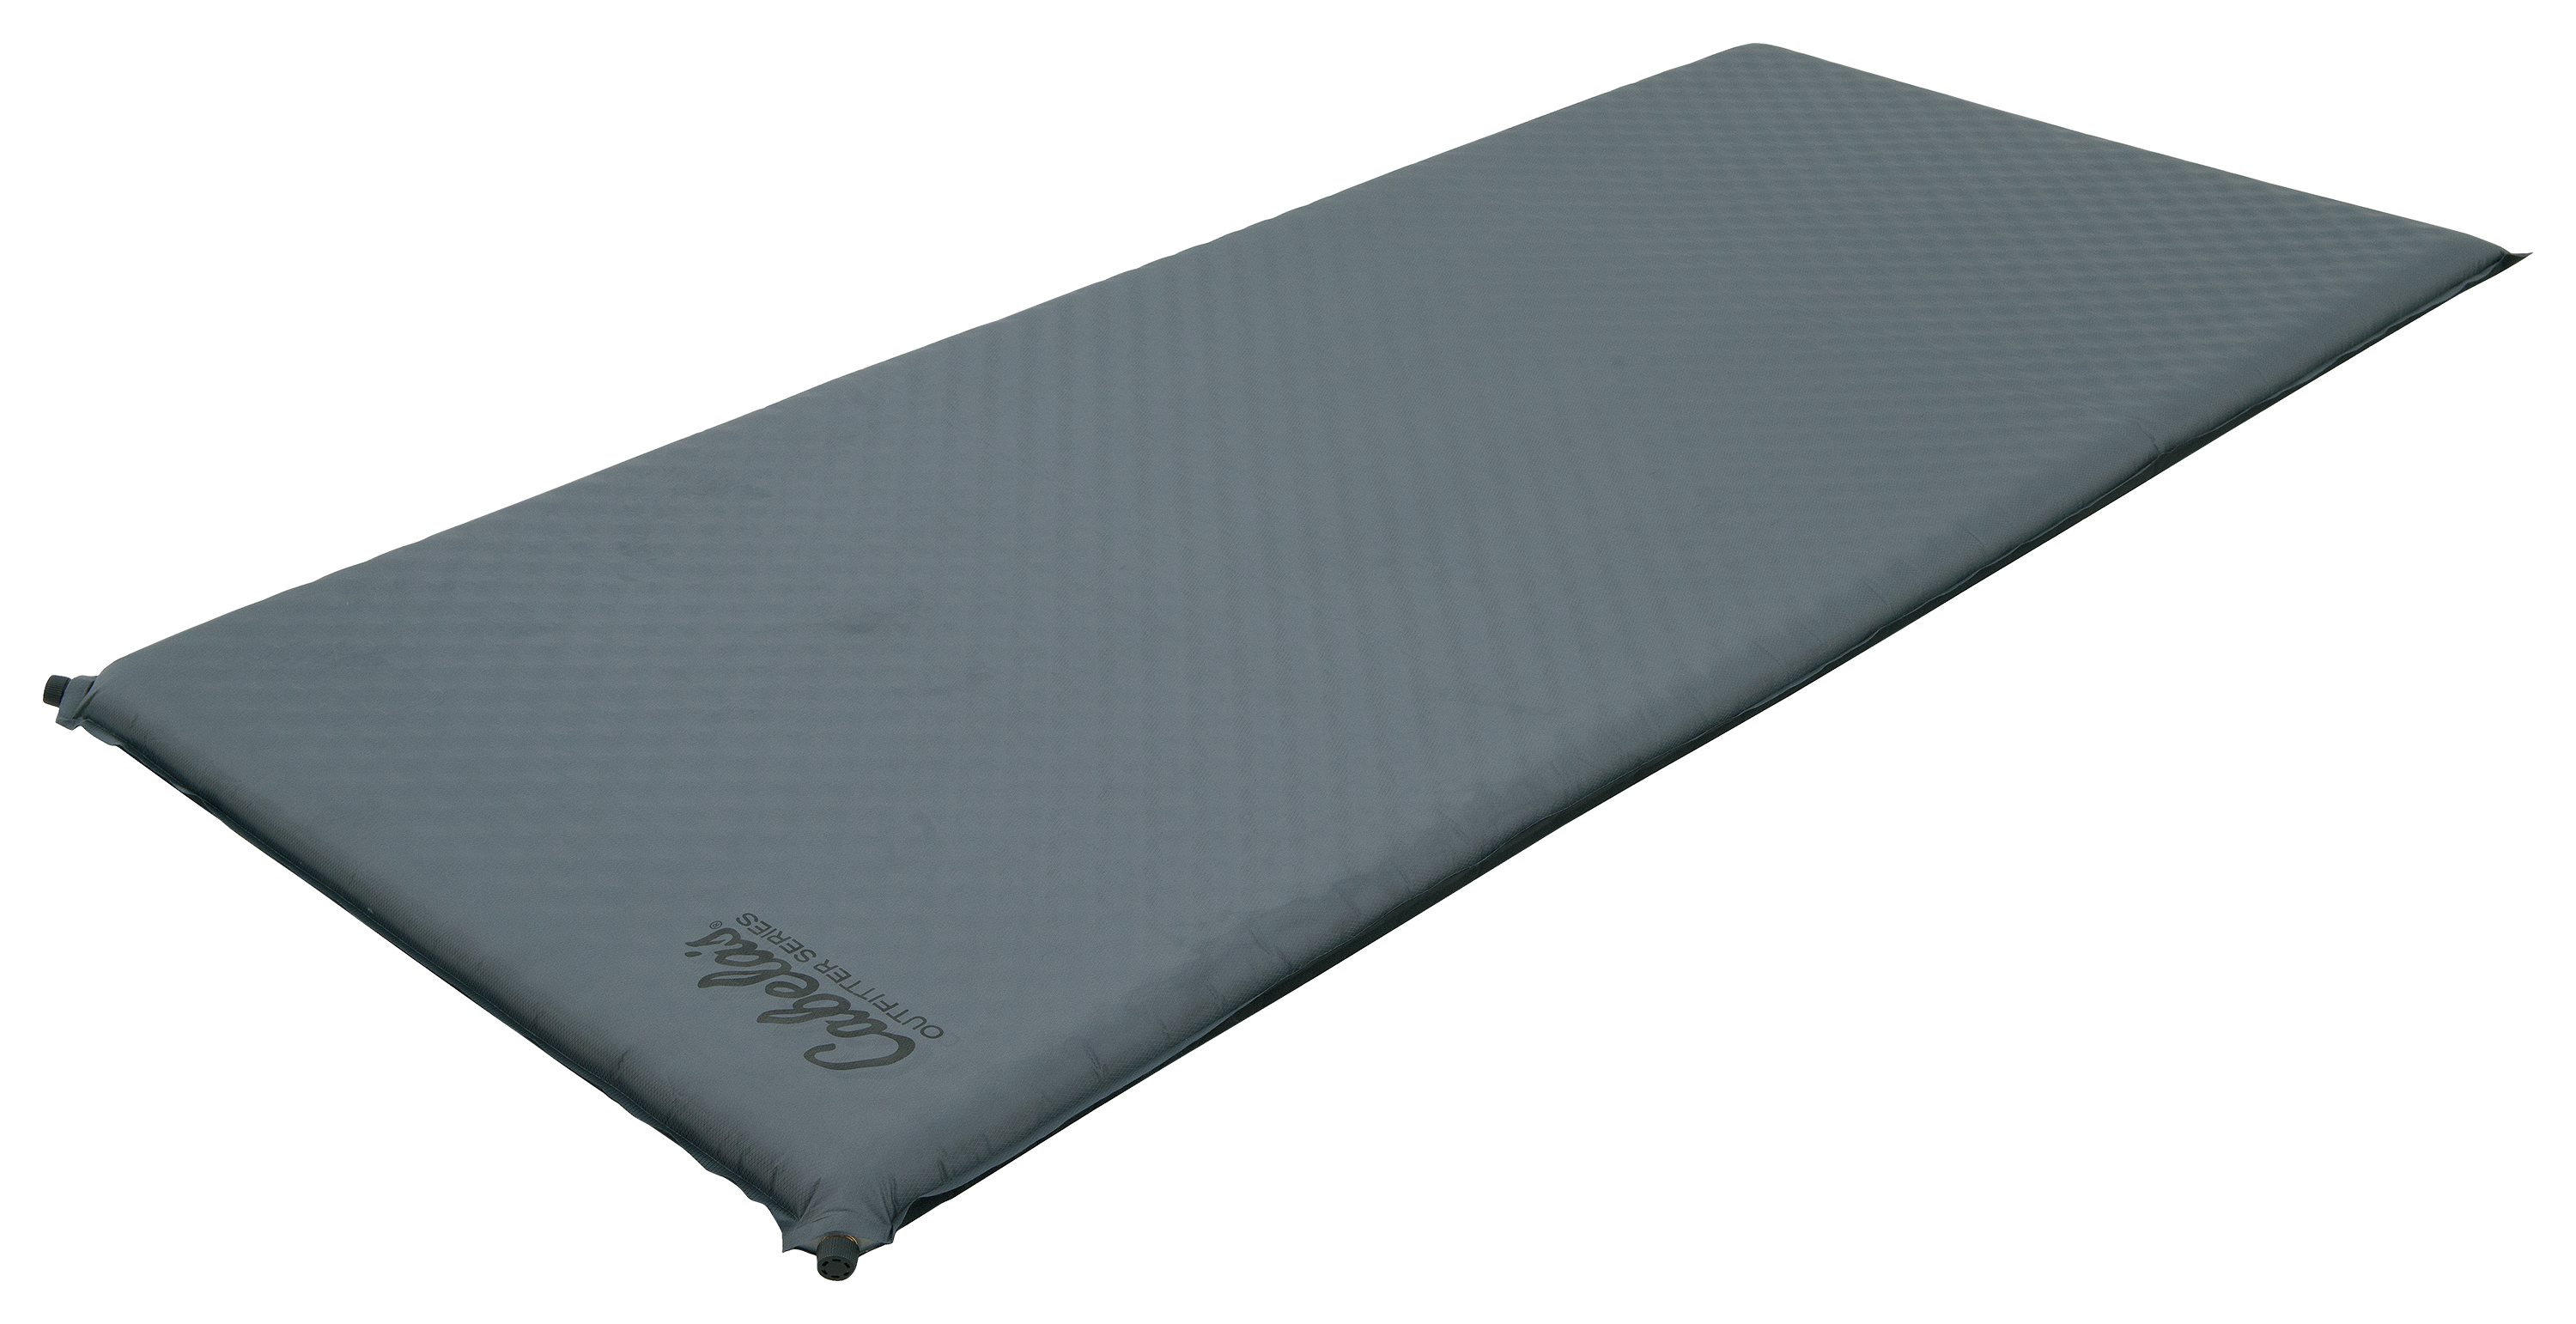 Cabela's Outfitter XL Sleeping Pad